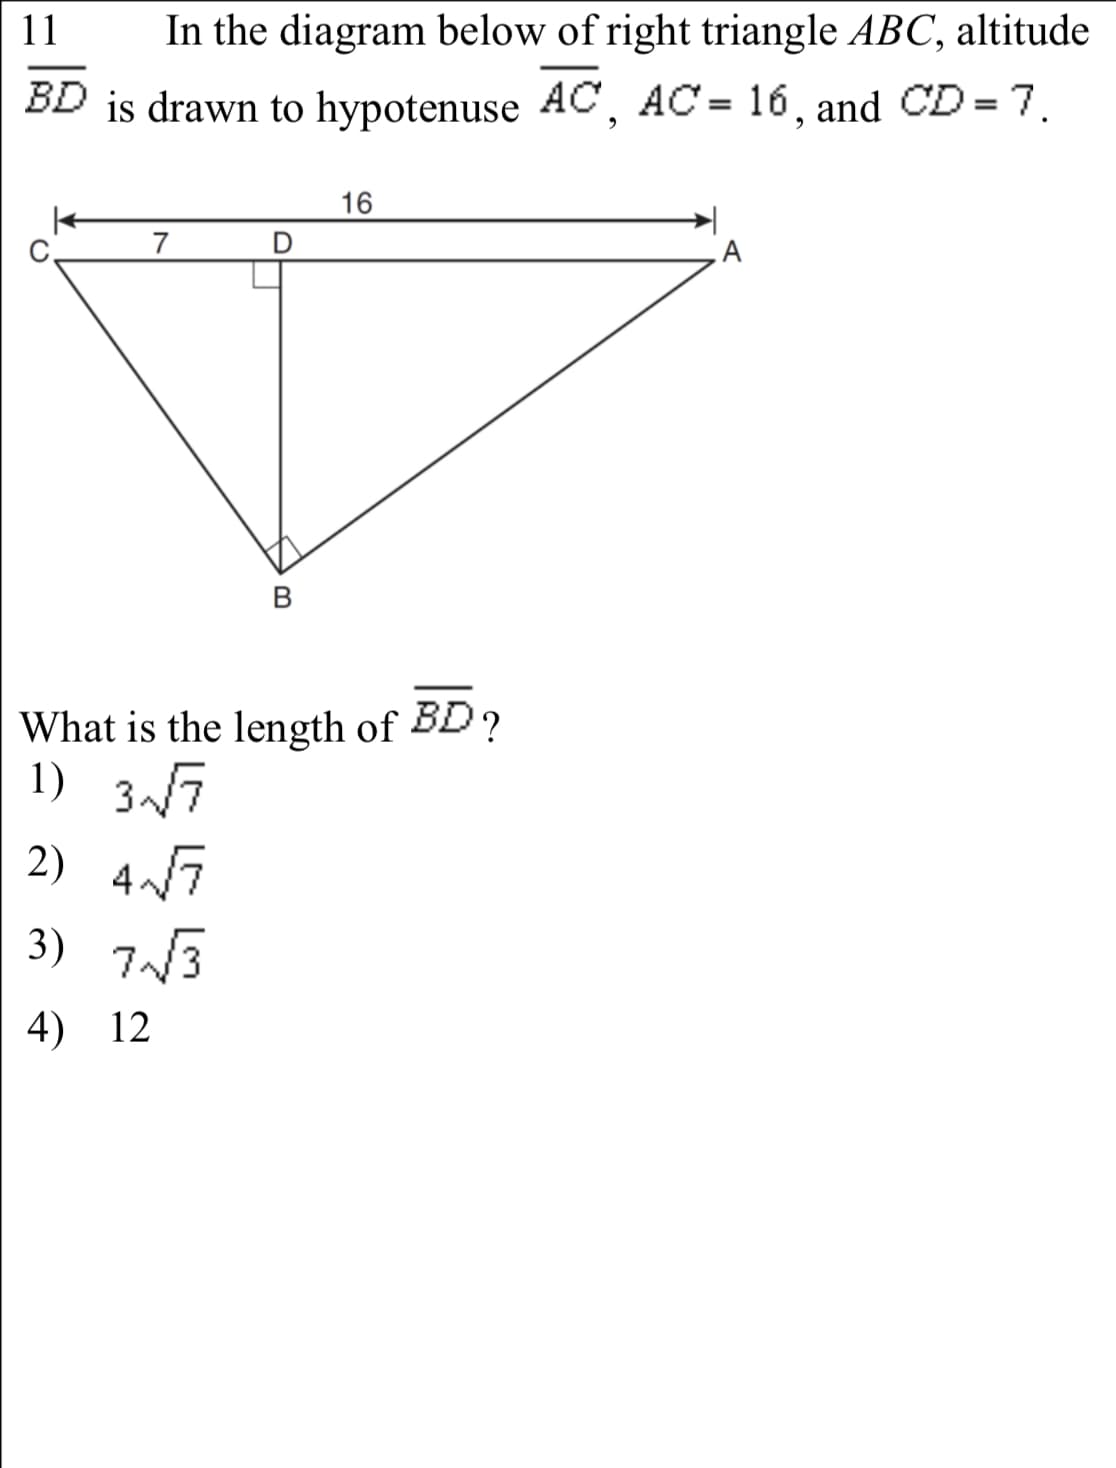 11
In the diagram below of right triangle ABC, altitude
BD is drawn to hypotenuse AC, AC = 16, and CD = 7.
16
7
What is the length of BD?
1) 37
2) 47
3) 7N3
4) 12
